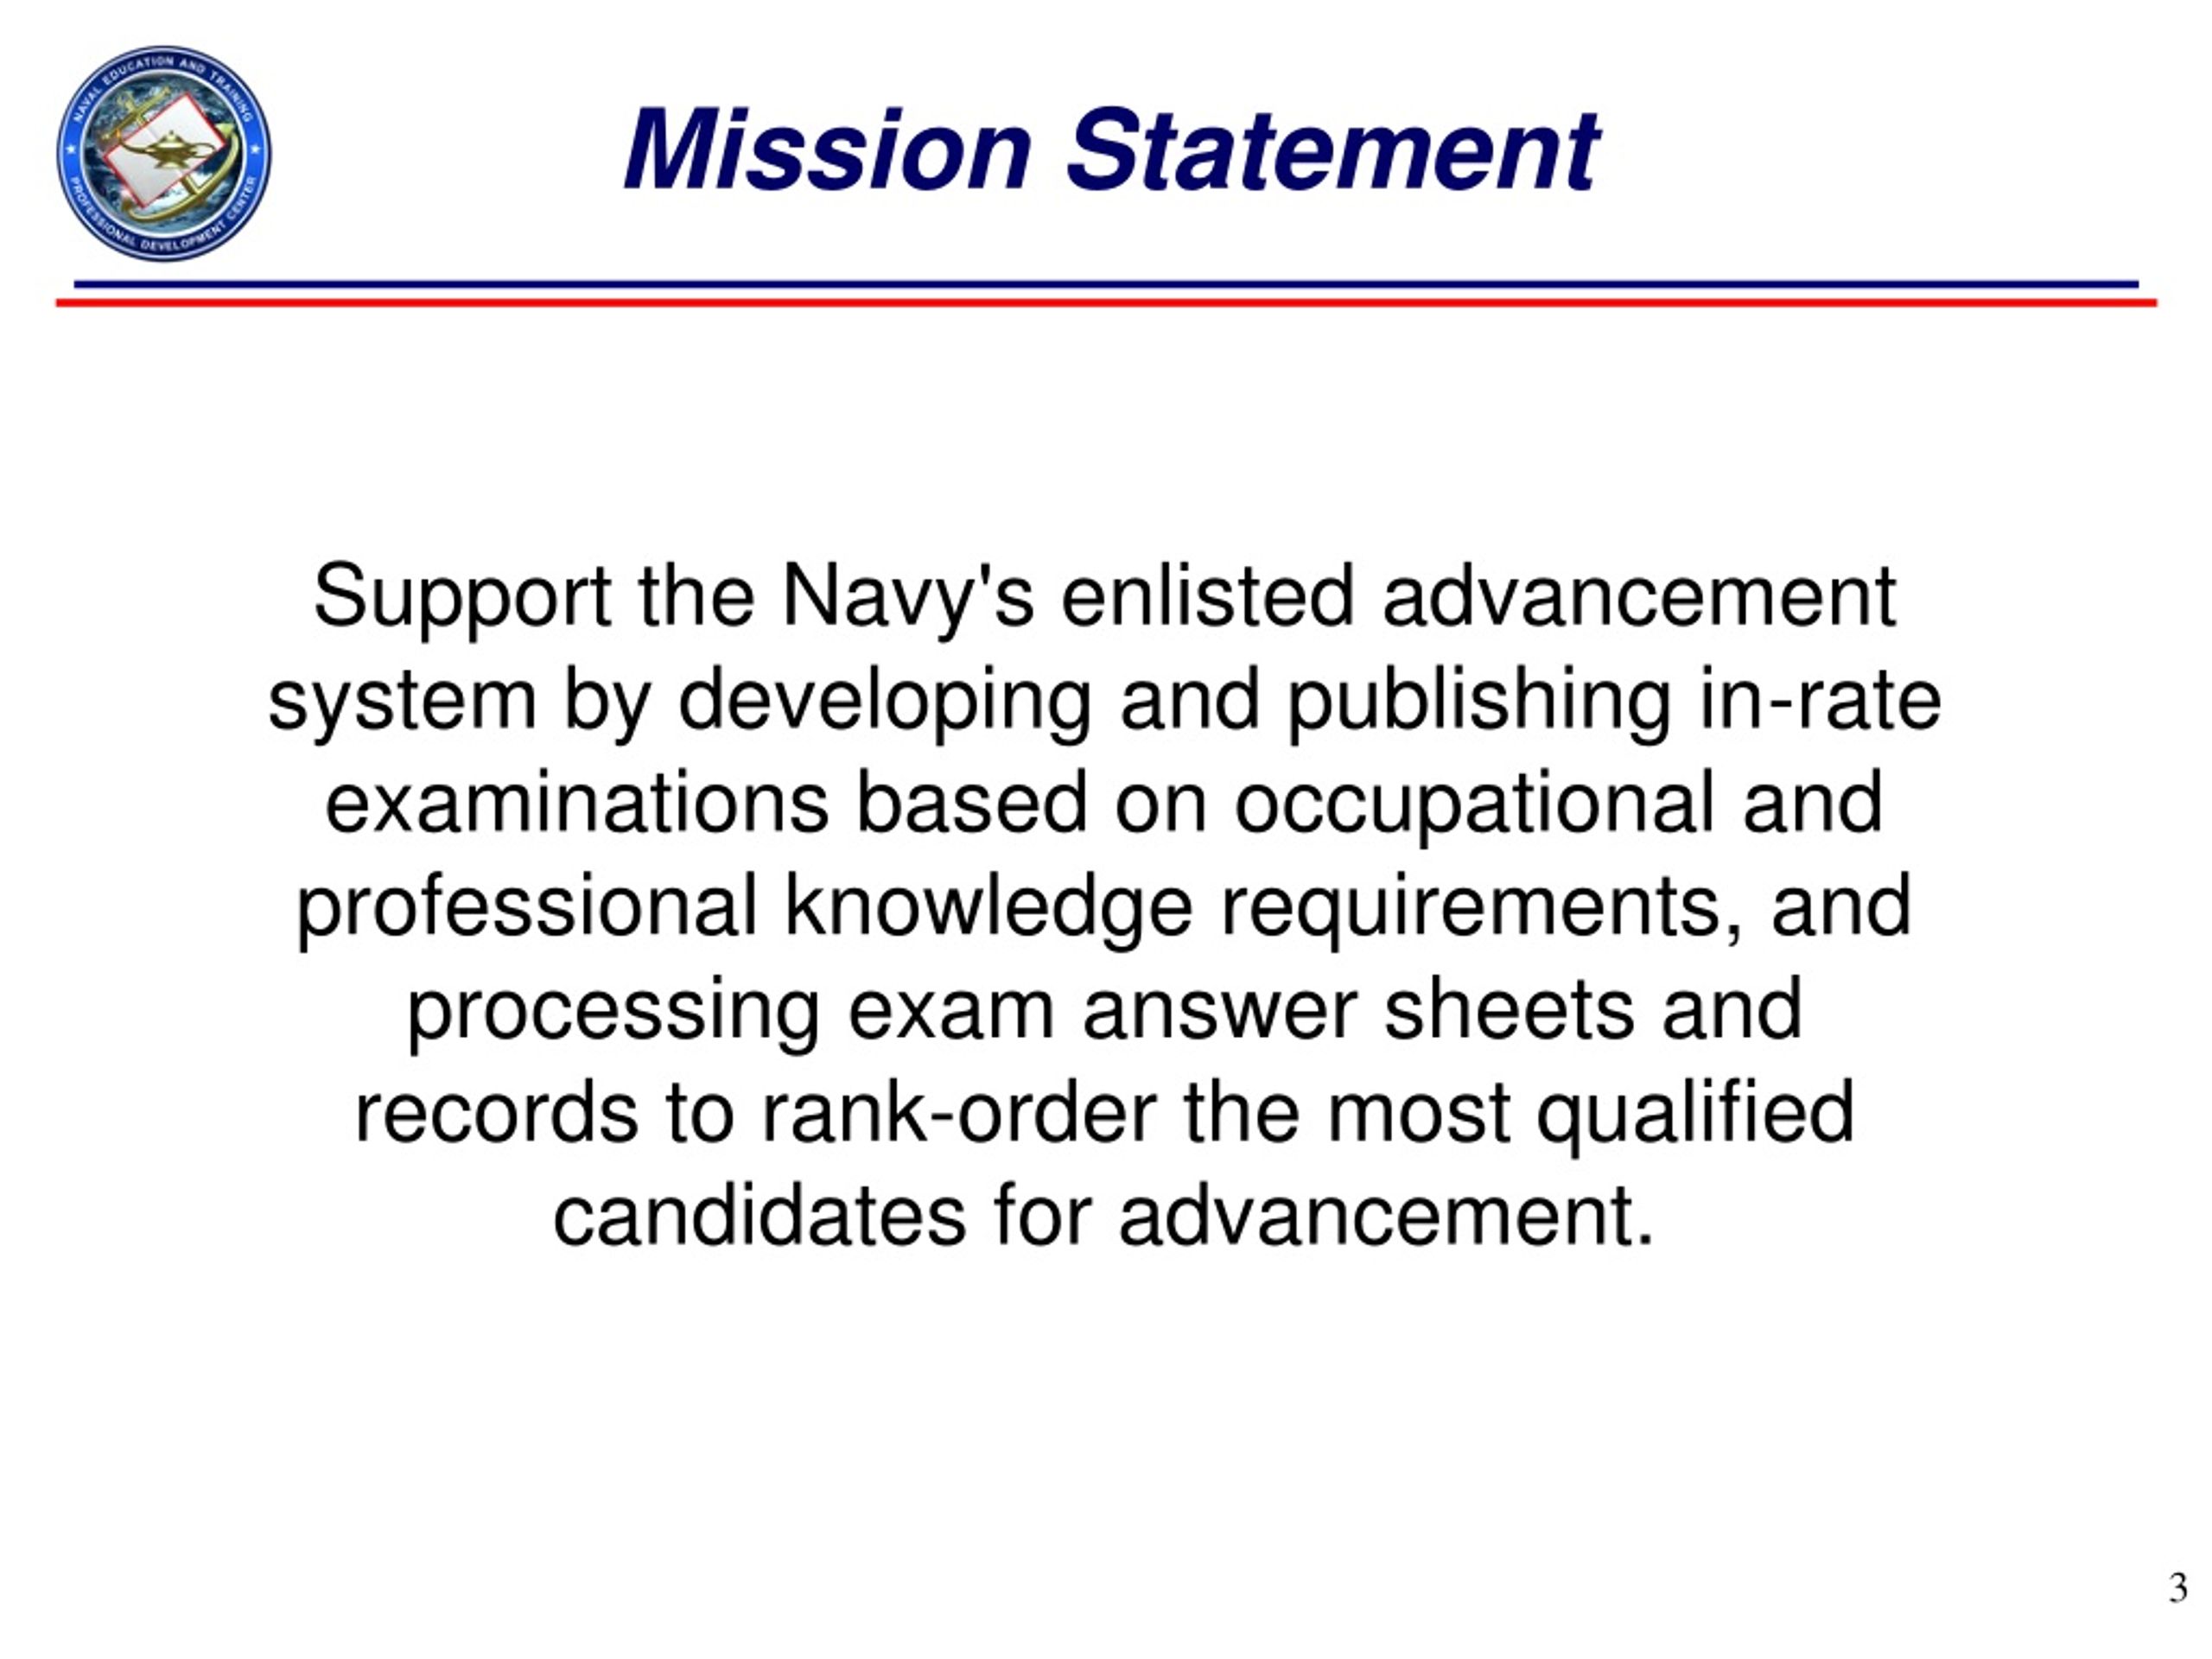 PPT Navy Enlisted Advancement System PowerPoint Presentation, free